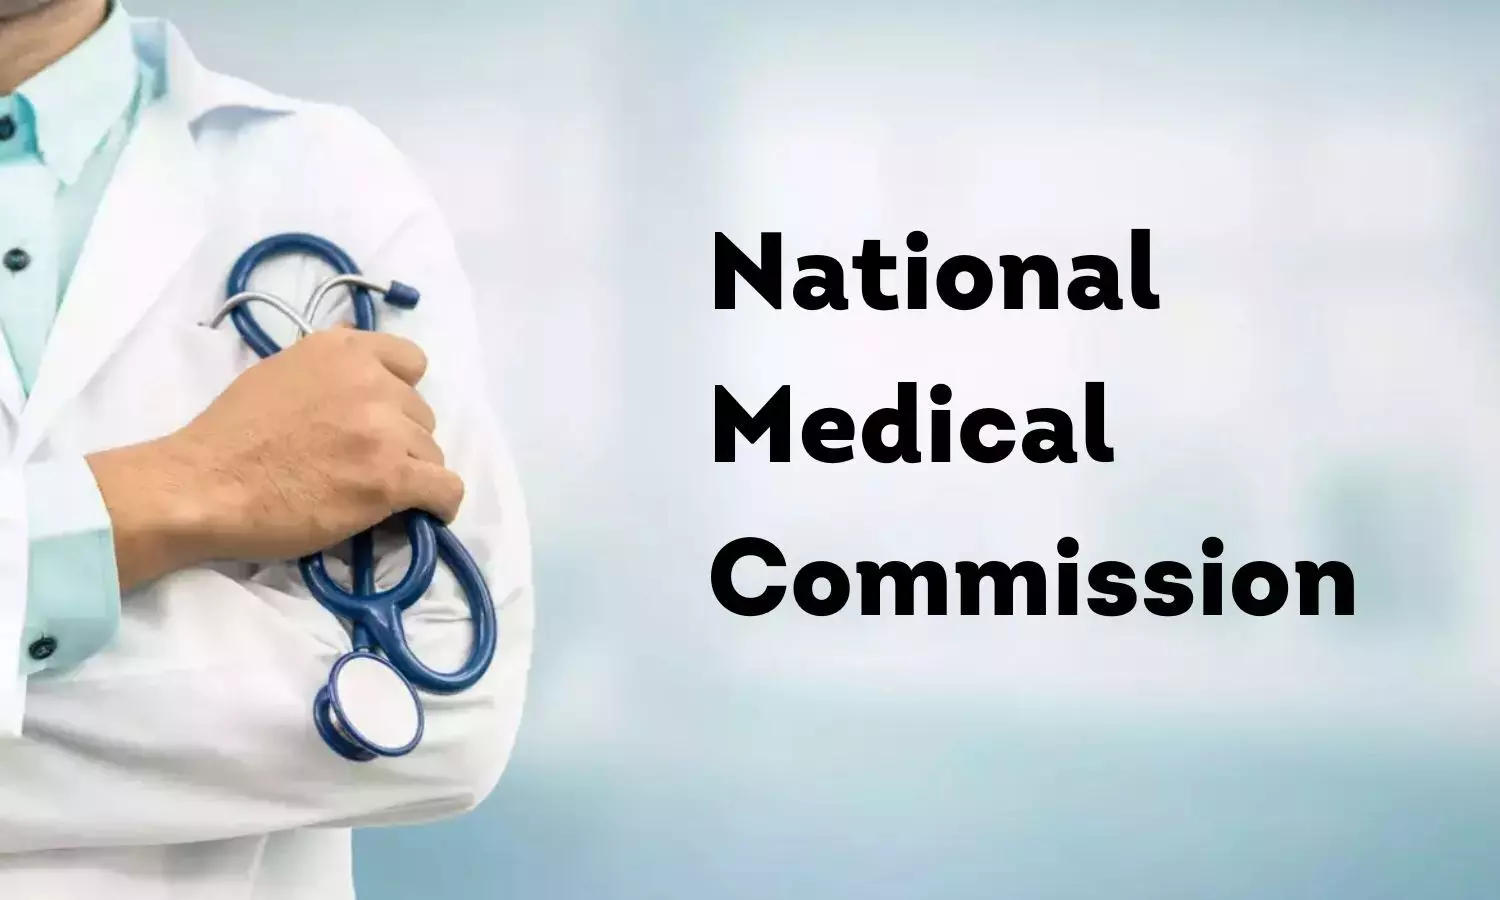 NMC allows provisional registration to MBBS graduates irrespective of the recognition status of their Medical Colleges